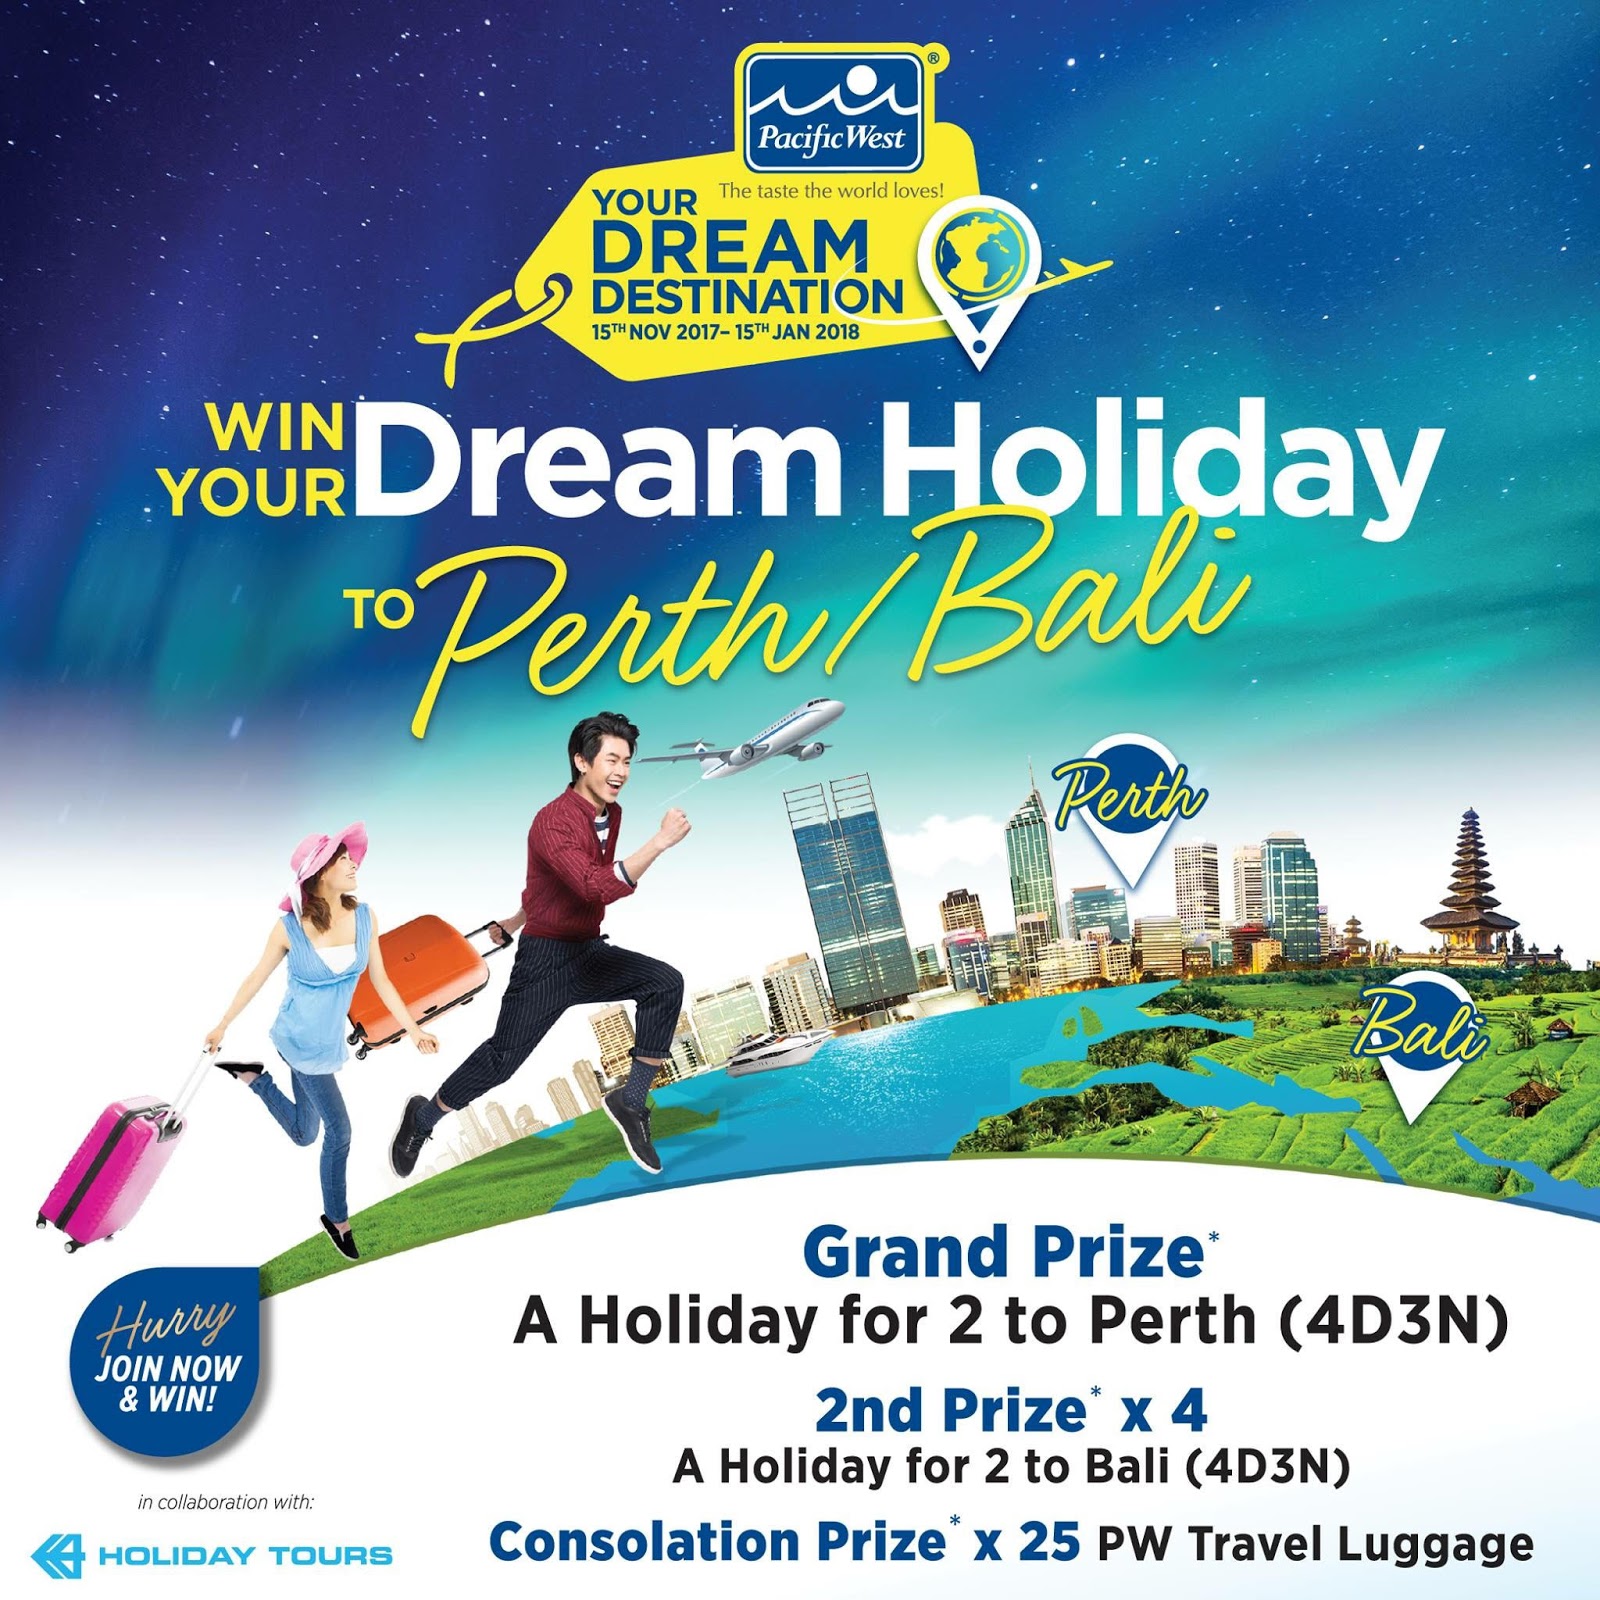 produk pacific west, cheezy fillet dan resepi mudah, win your dream holiday